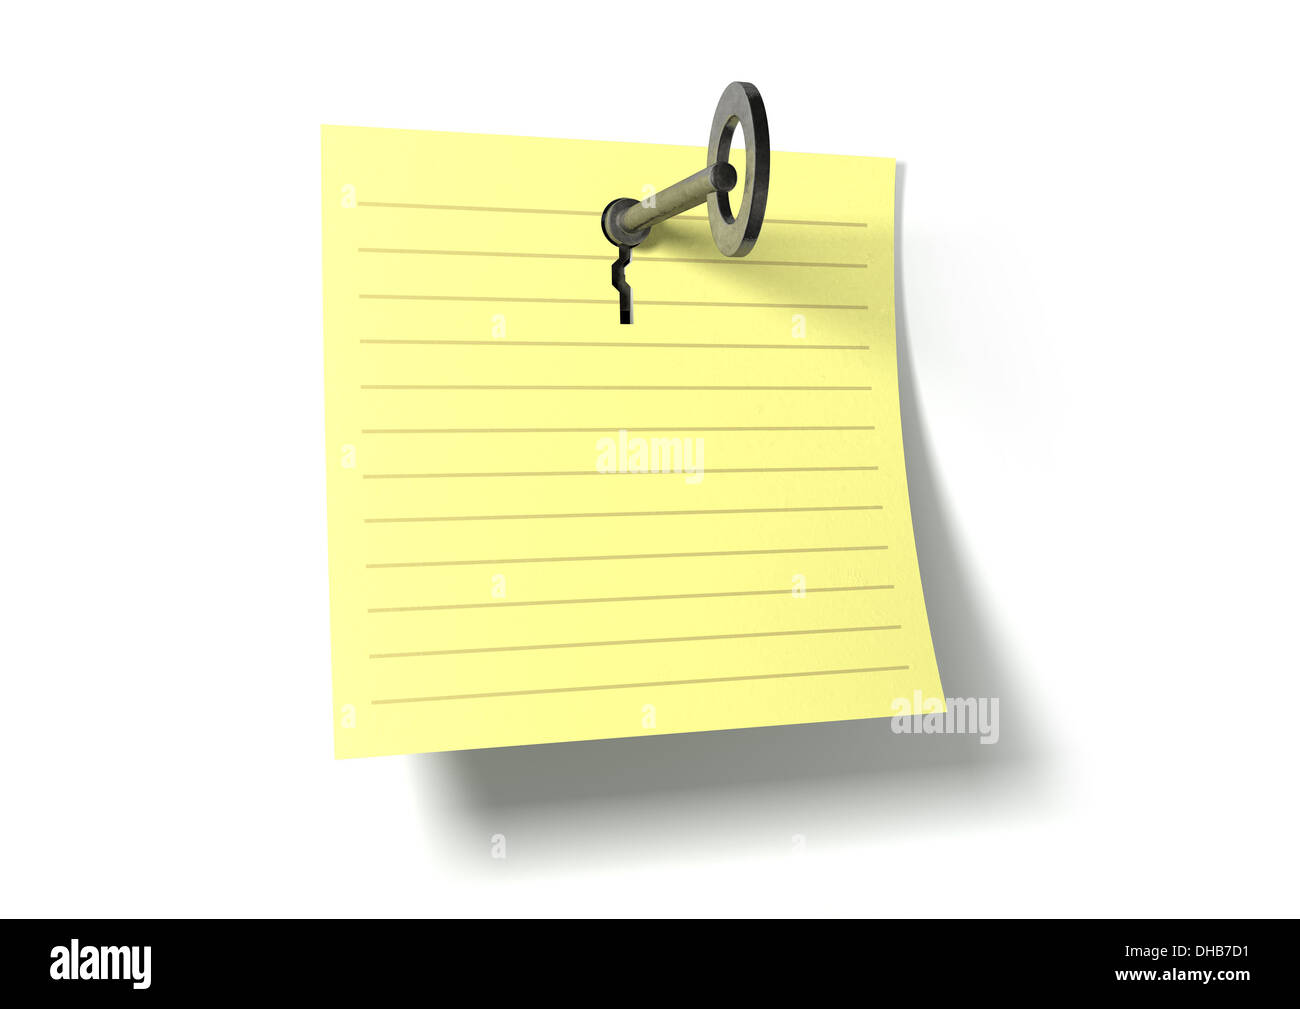 A yellow notepad page peeling upwards with a punched out key hole and a metal key inserted in it on an isolated background Stock Photo